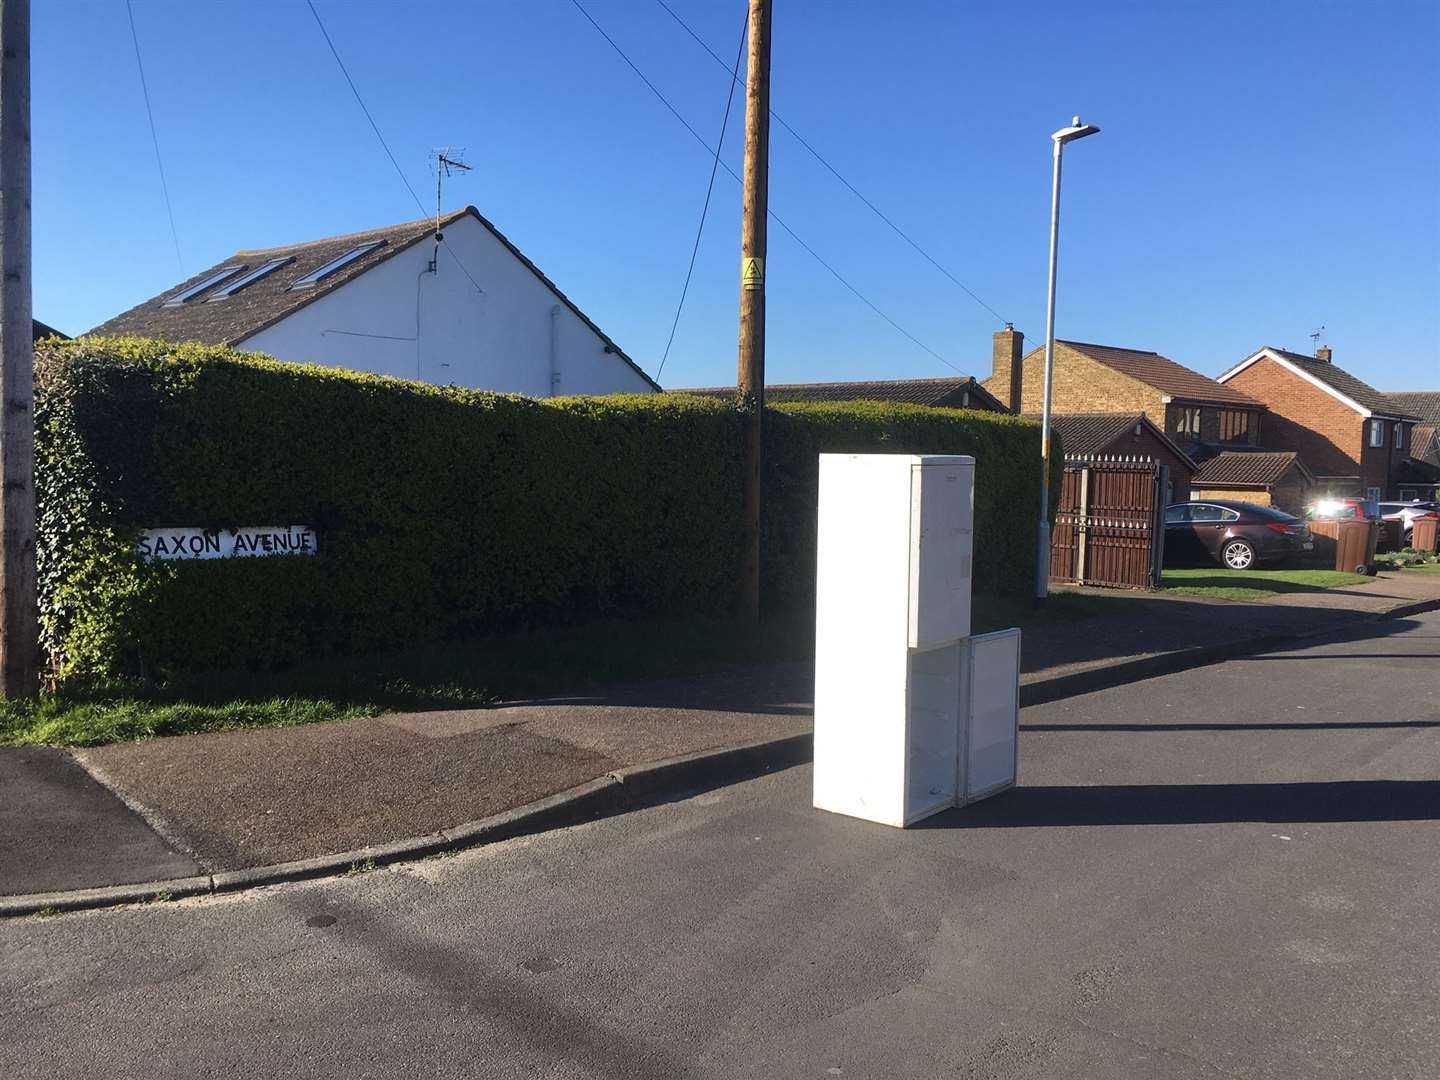 Fridge-freezer dumped in Saxon Avenue, Minster, Sheppey at the junction with Glenwood Drive